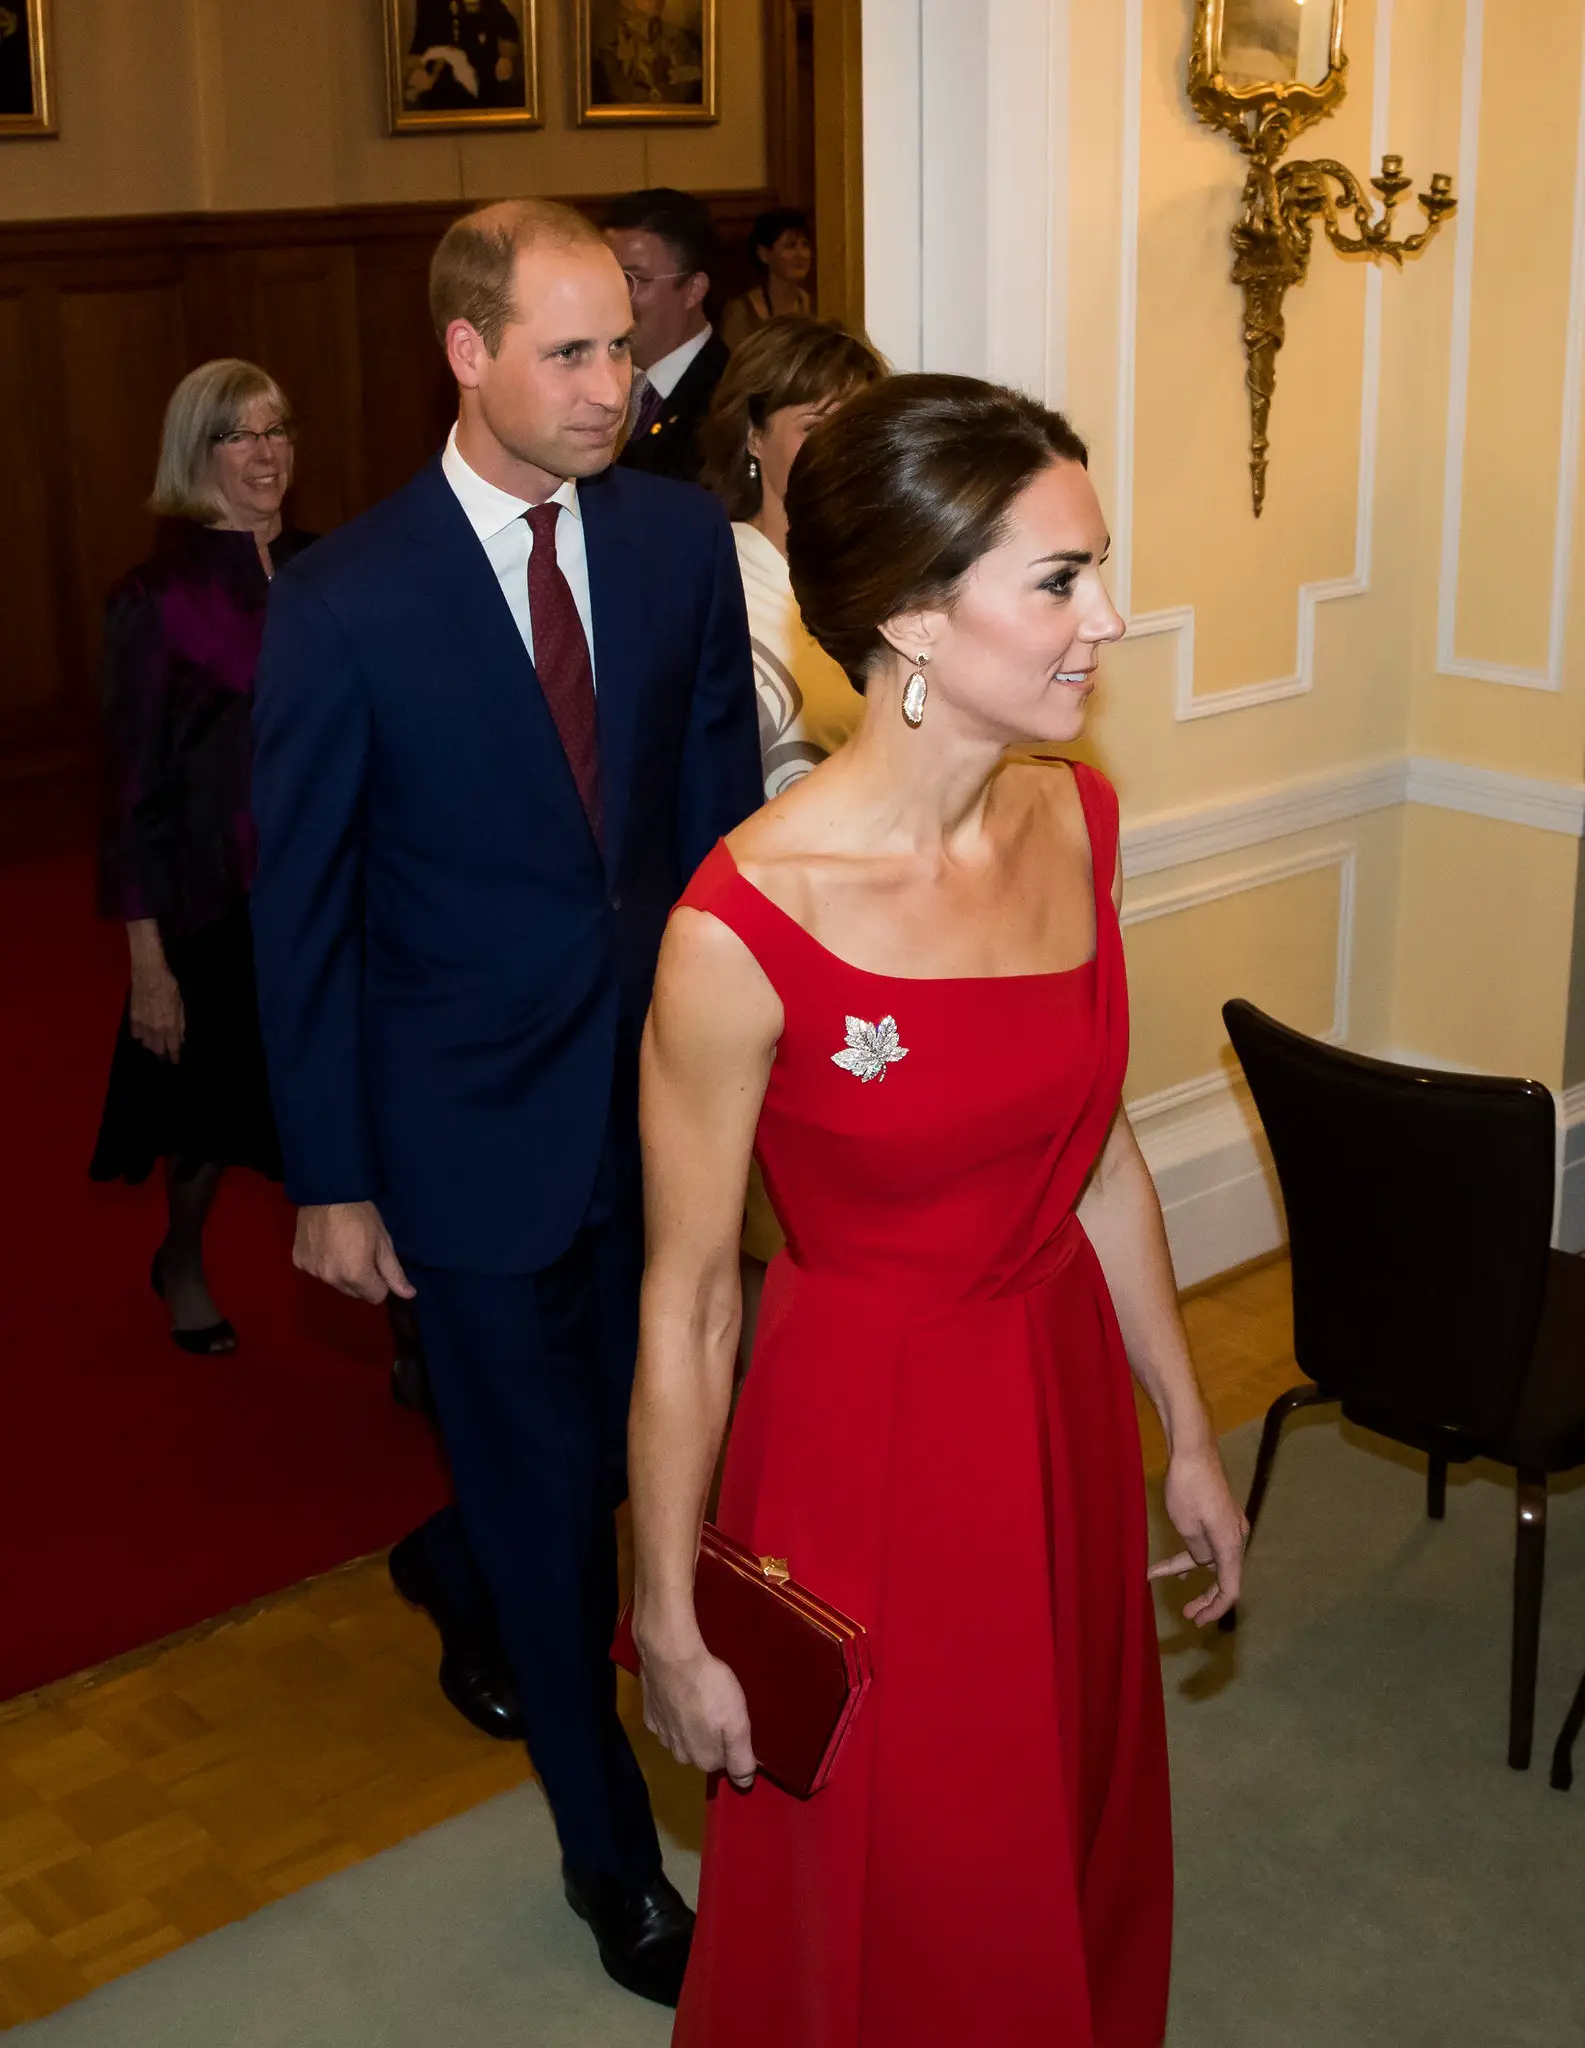 The Duchess of Cambridge looked gorgeous in red Preen by Thornton Bregazzi Finella Satin Midi Dress at the black rod ceremony in canada